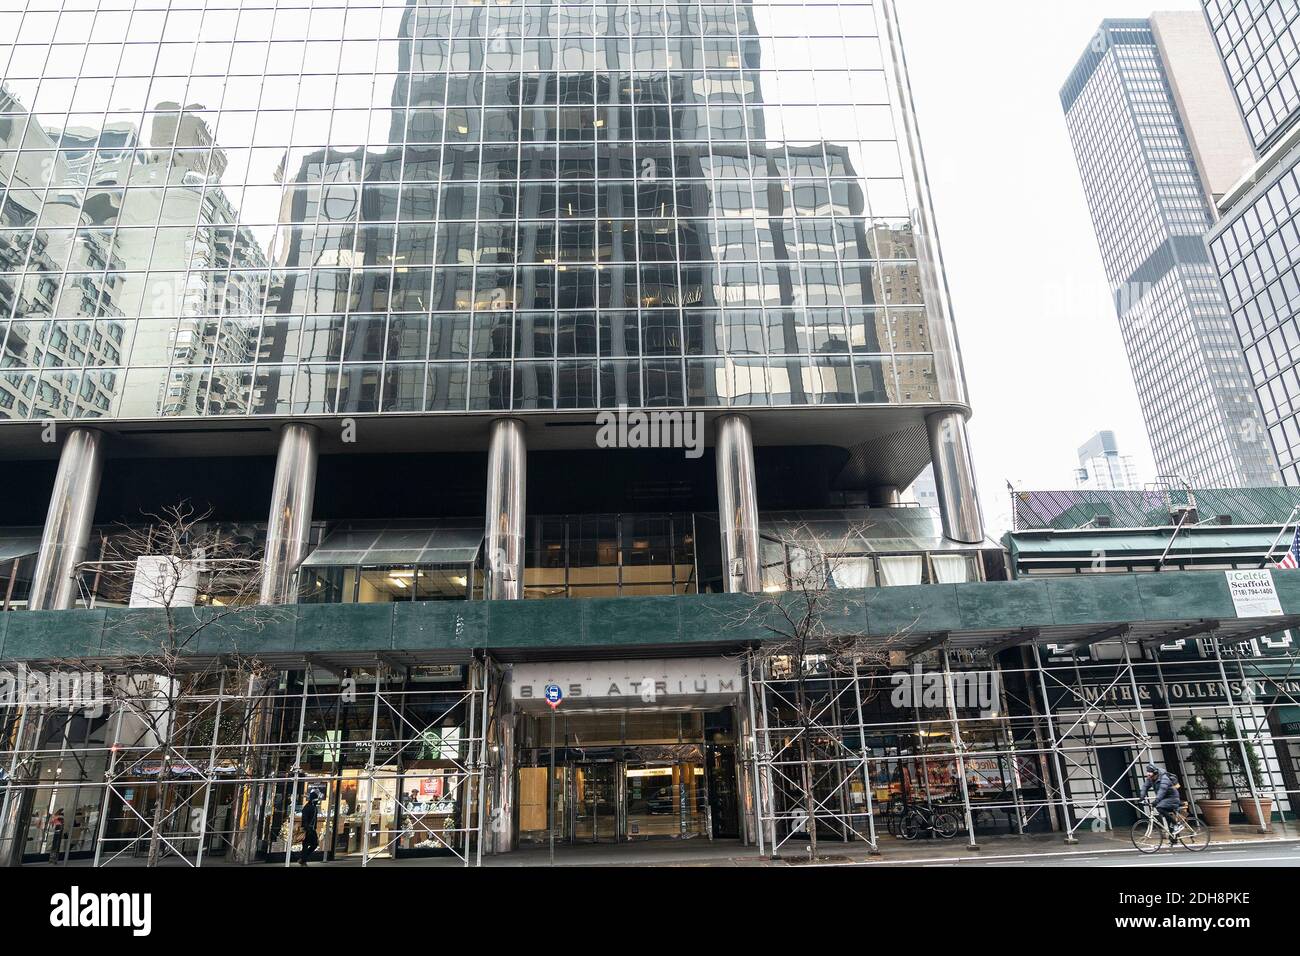 New York, United States. 09th Dec, 2020. View of the building where NewsMax New York headquarters located on 3rd Avenue on a day when Newsmax TV scores a ratings win over Fox News. In the key 25- to 54-year-old demographic prized by advertisers, 'Greg Kelly Reports' on Newsmax out-rated 'The Story with Martha MacCallum' on Fox. Thos two programs run on 7PM slot. This is milestone in the cable news industry. (Photo by Lev Radin/Pacific Press) Credit: Pacific Press Media Production Corp./Alamy Live News Stock Photo